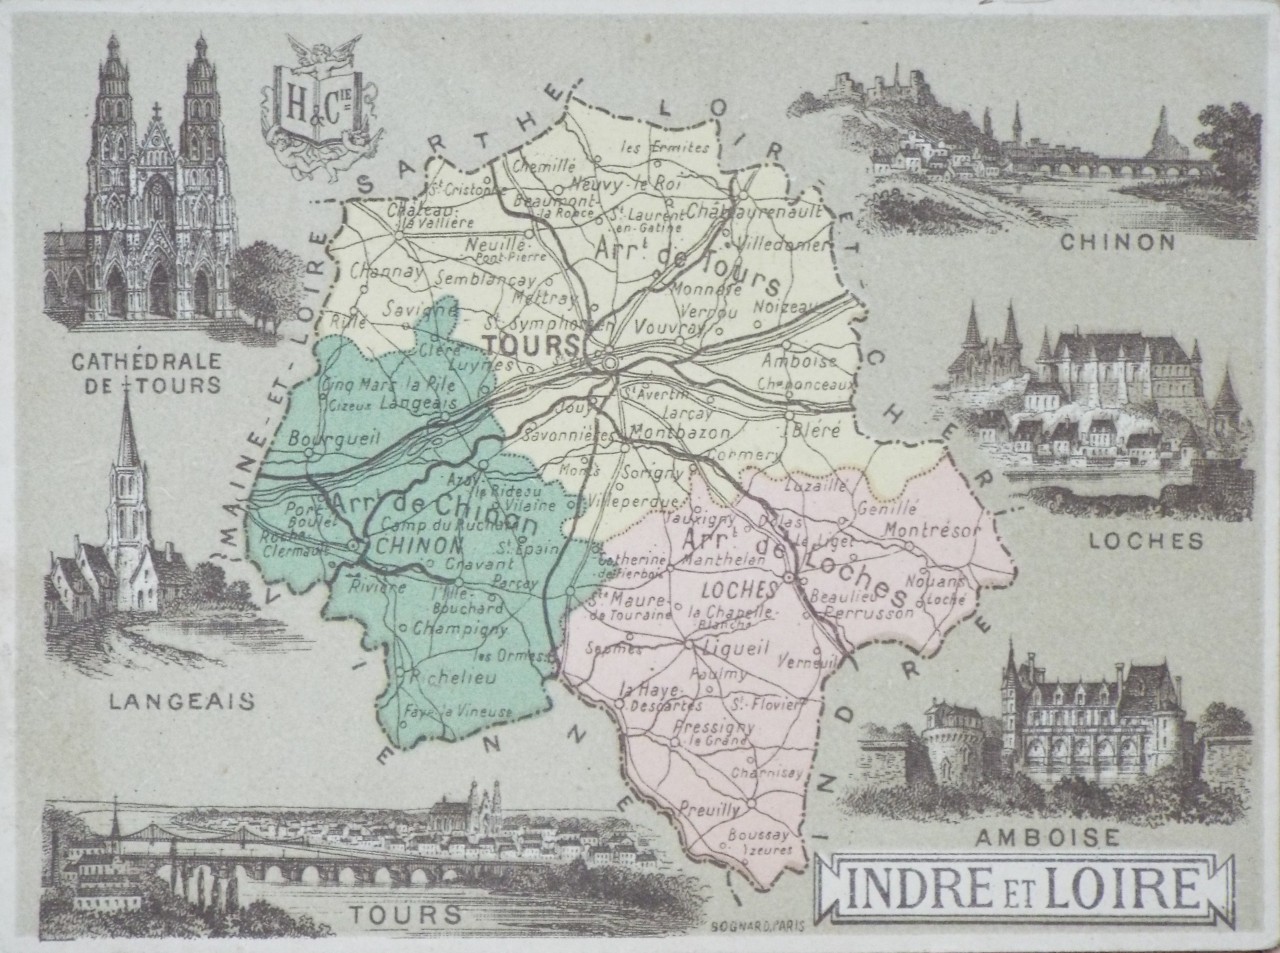 Map of Indre et Loire